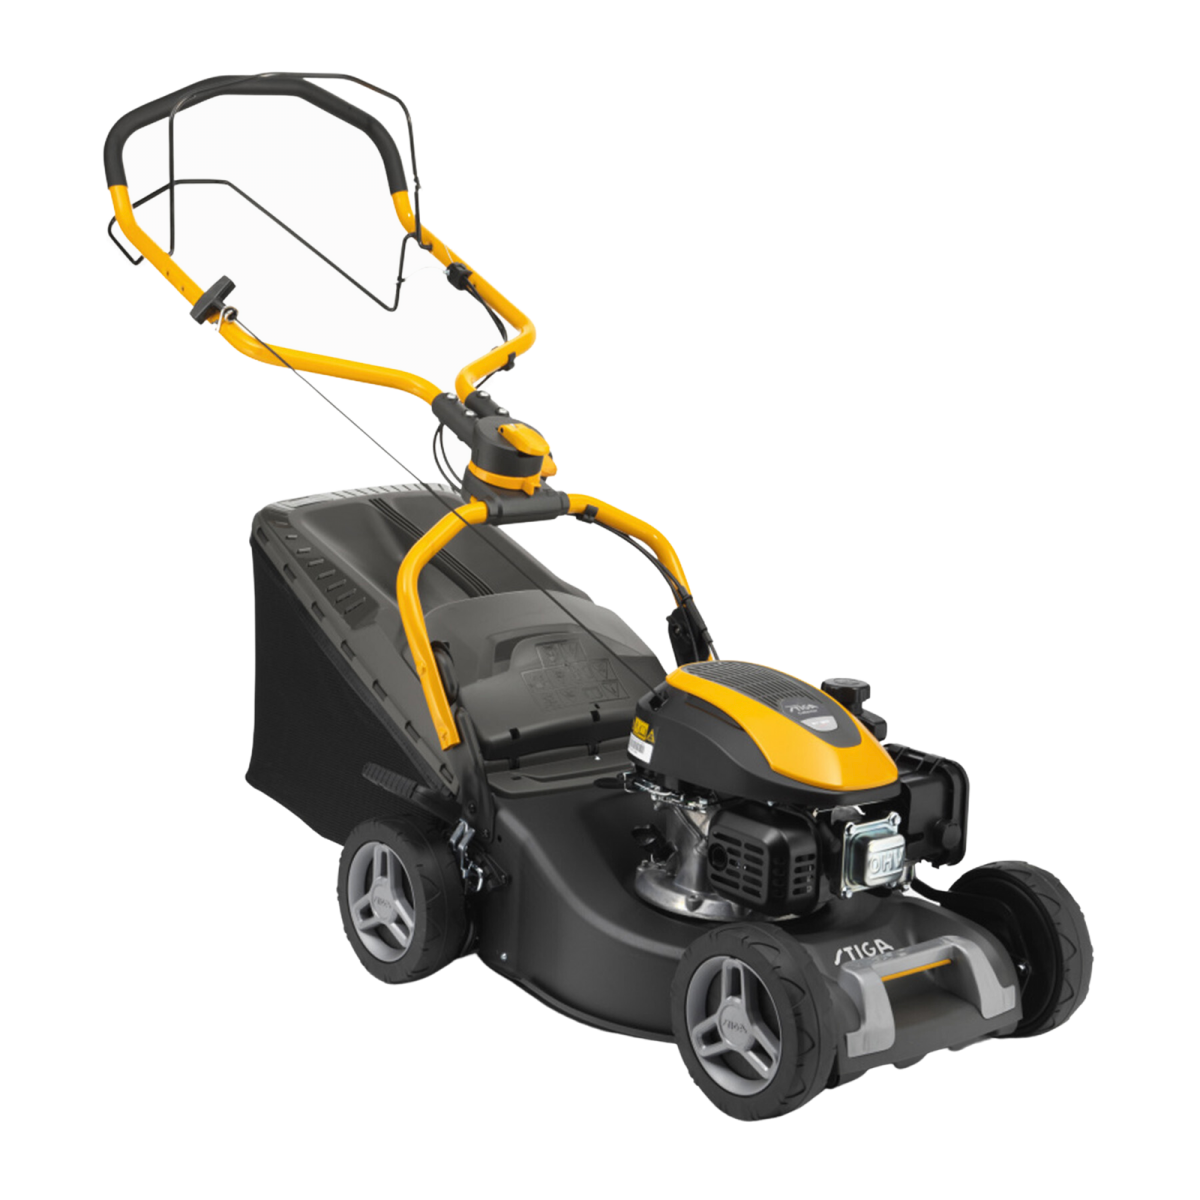 Petrol mower with Stiga Collector 543 S drive